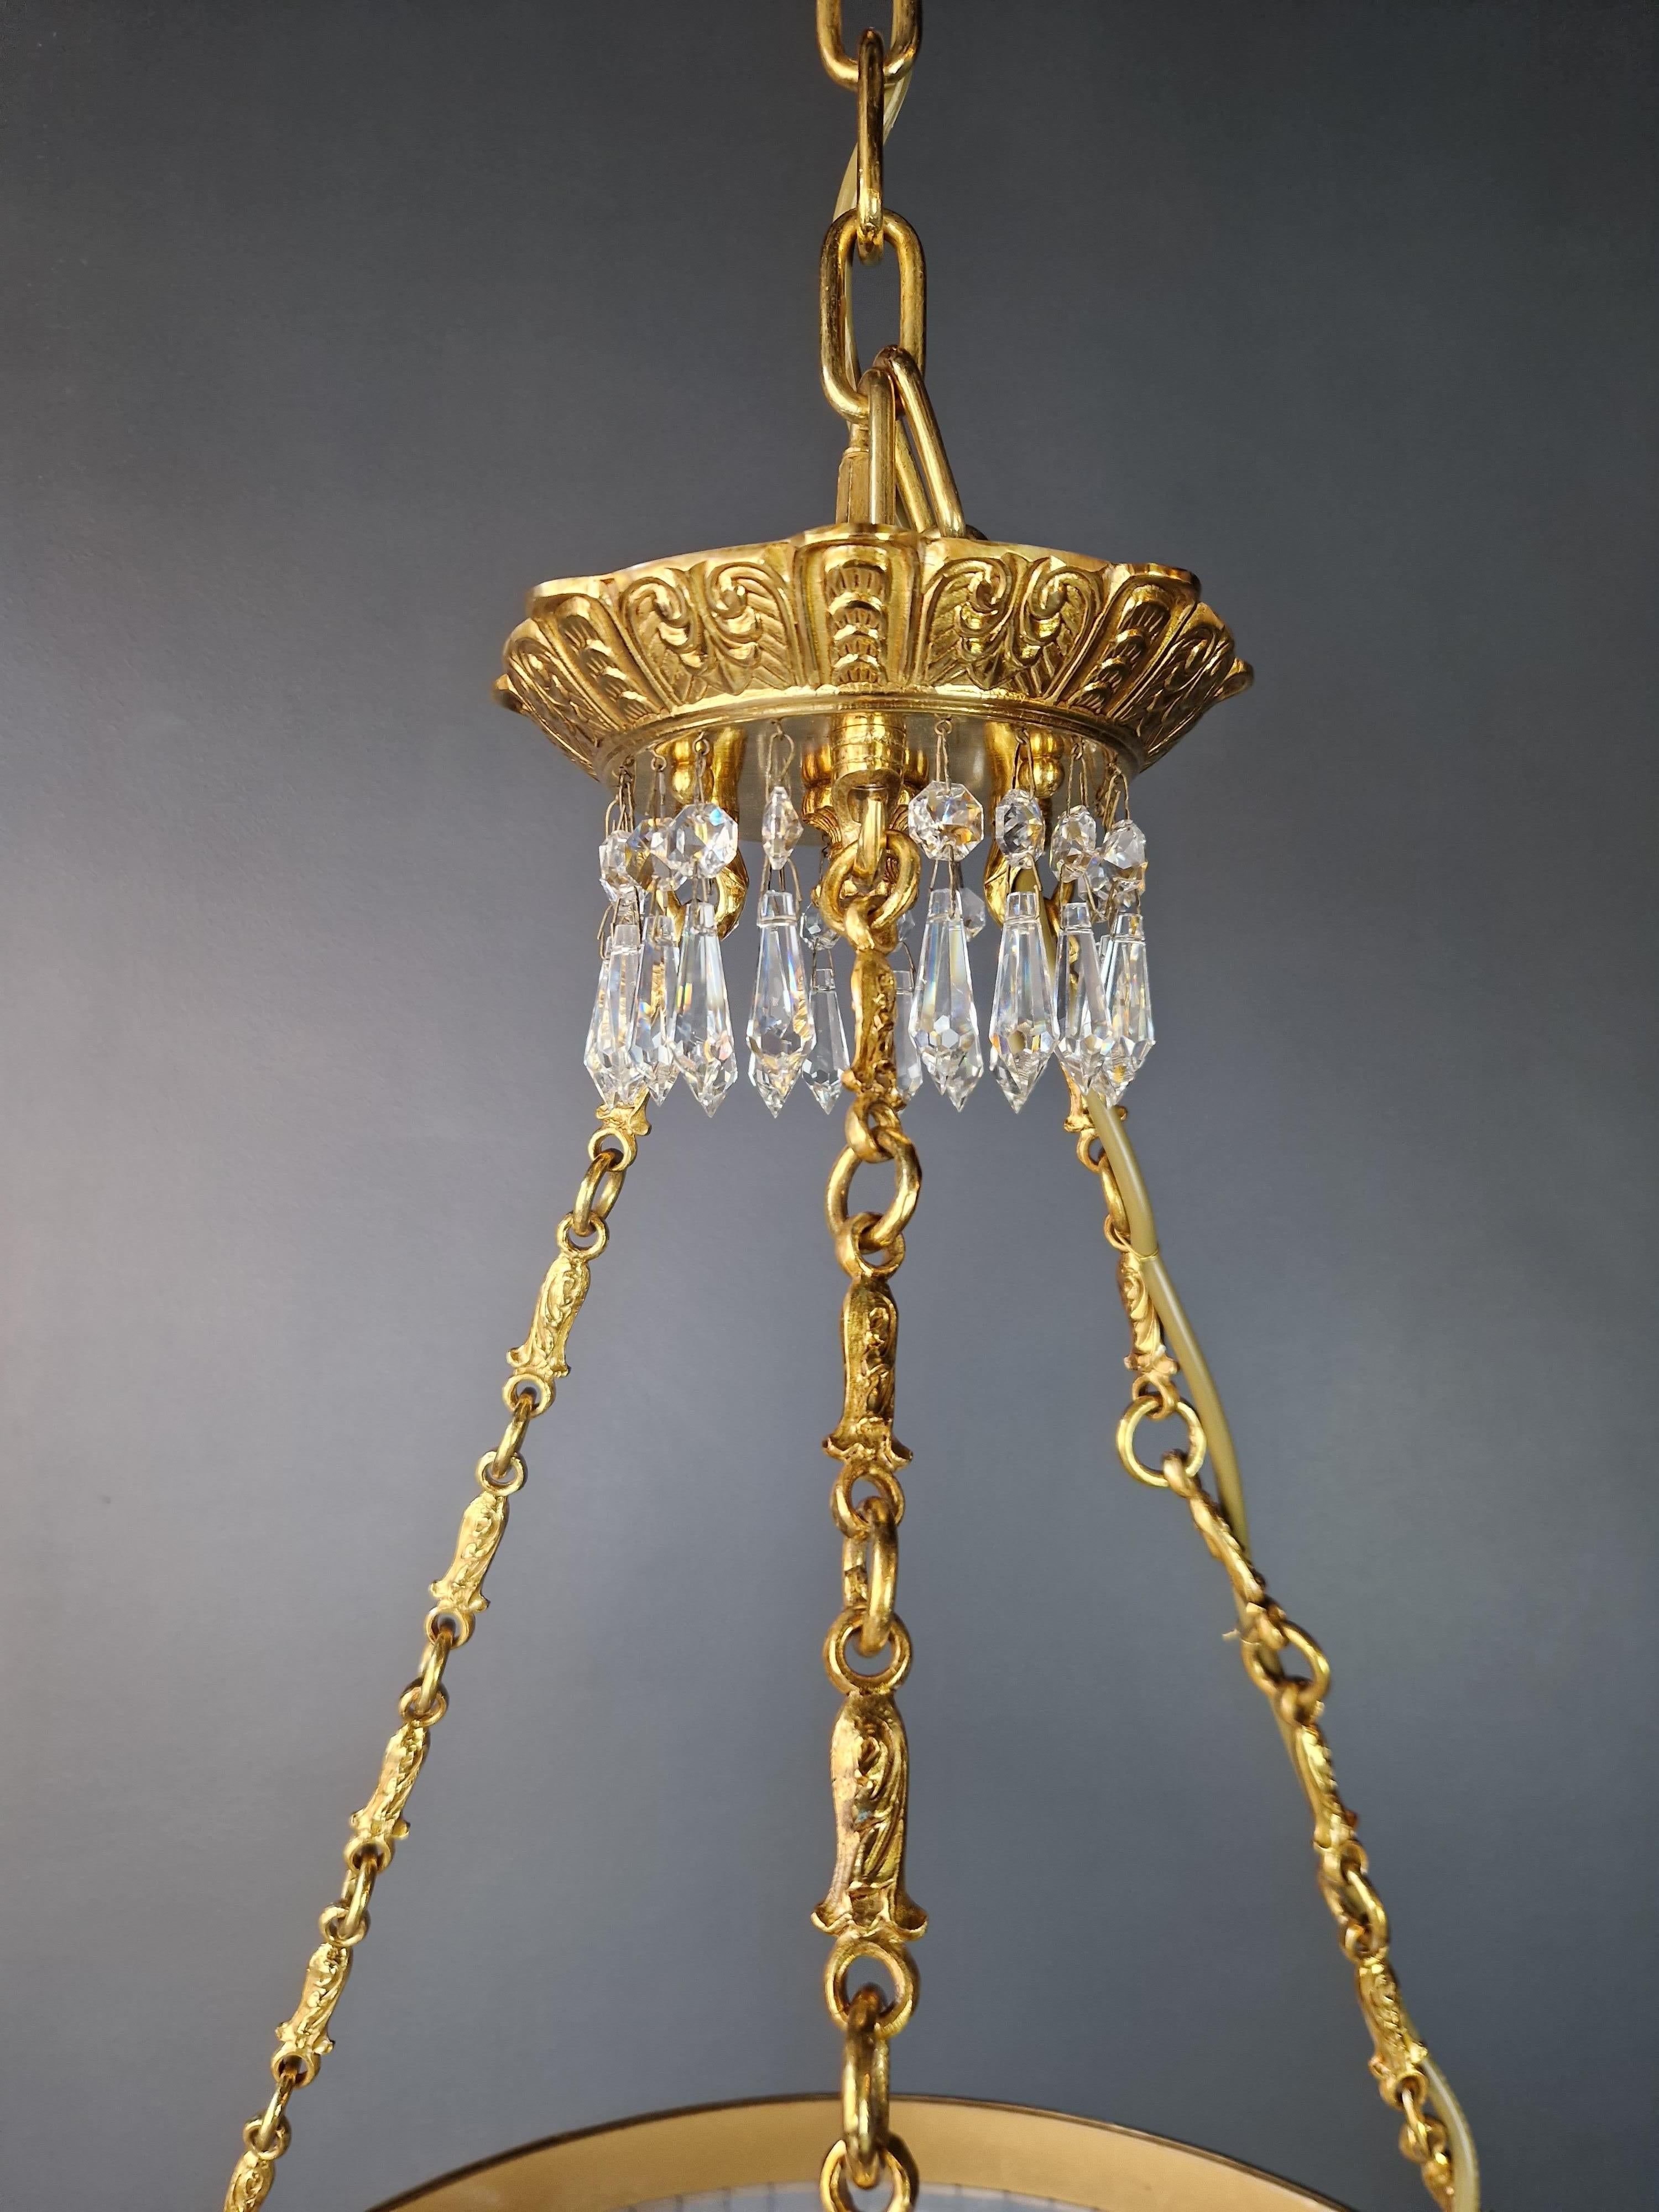 Hand-Knotted Brass Basket Classical Chandelier Crystal Lustre Lamp Antique Gold For Sale